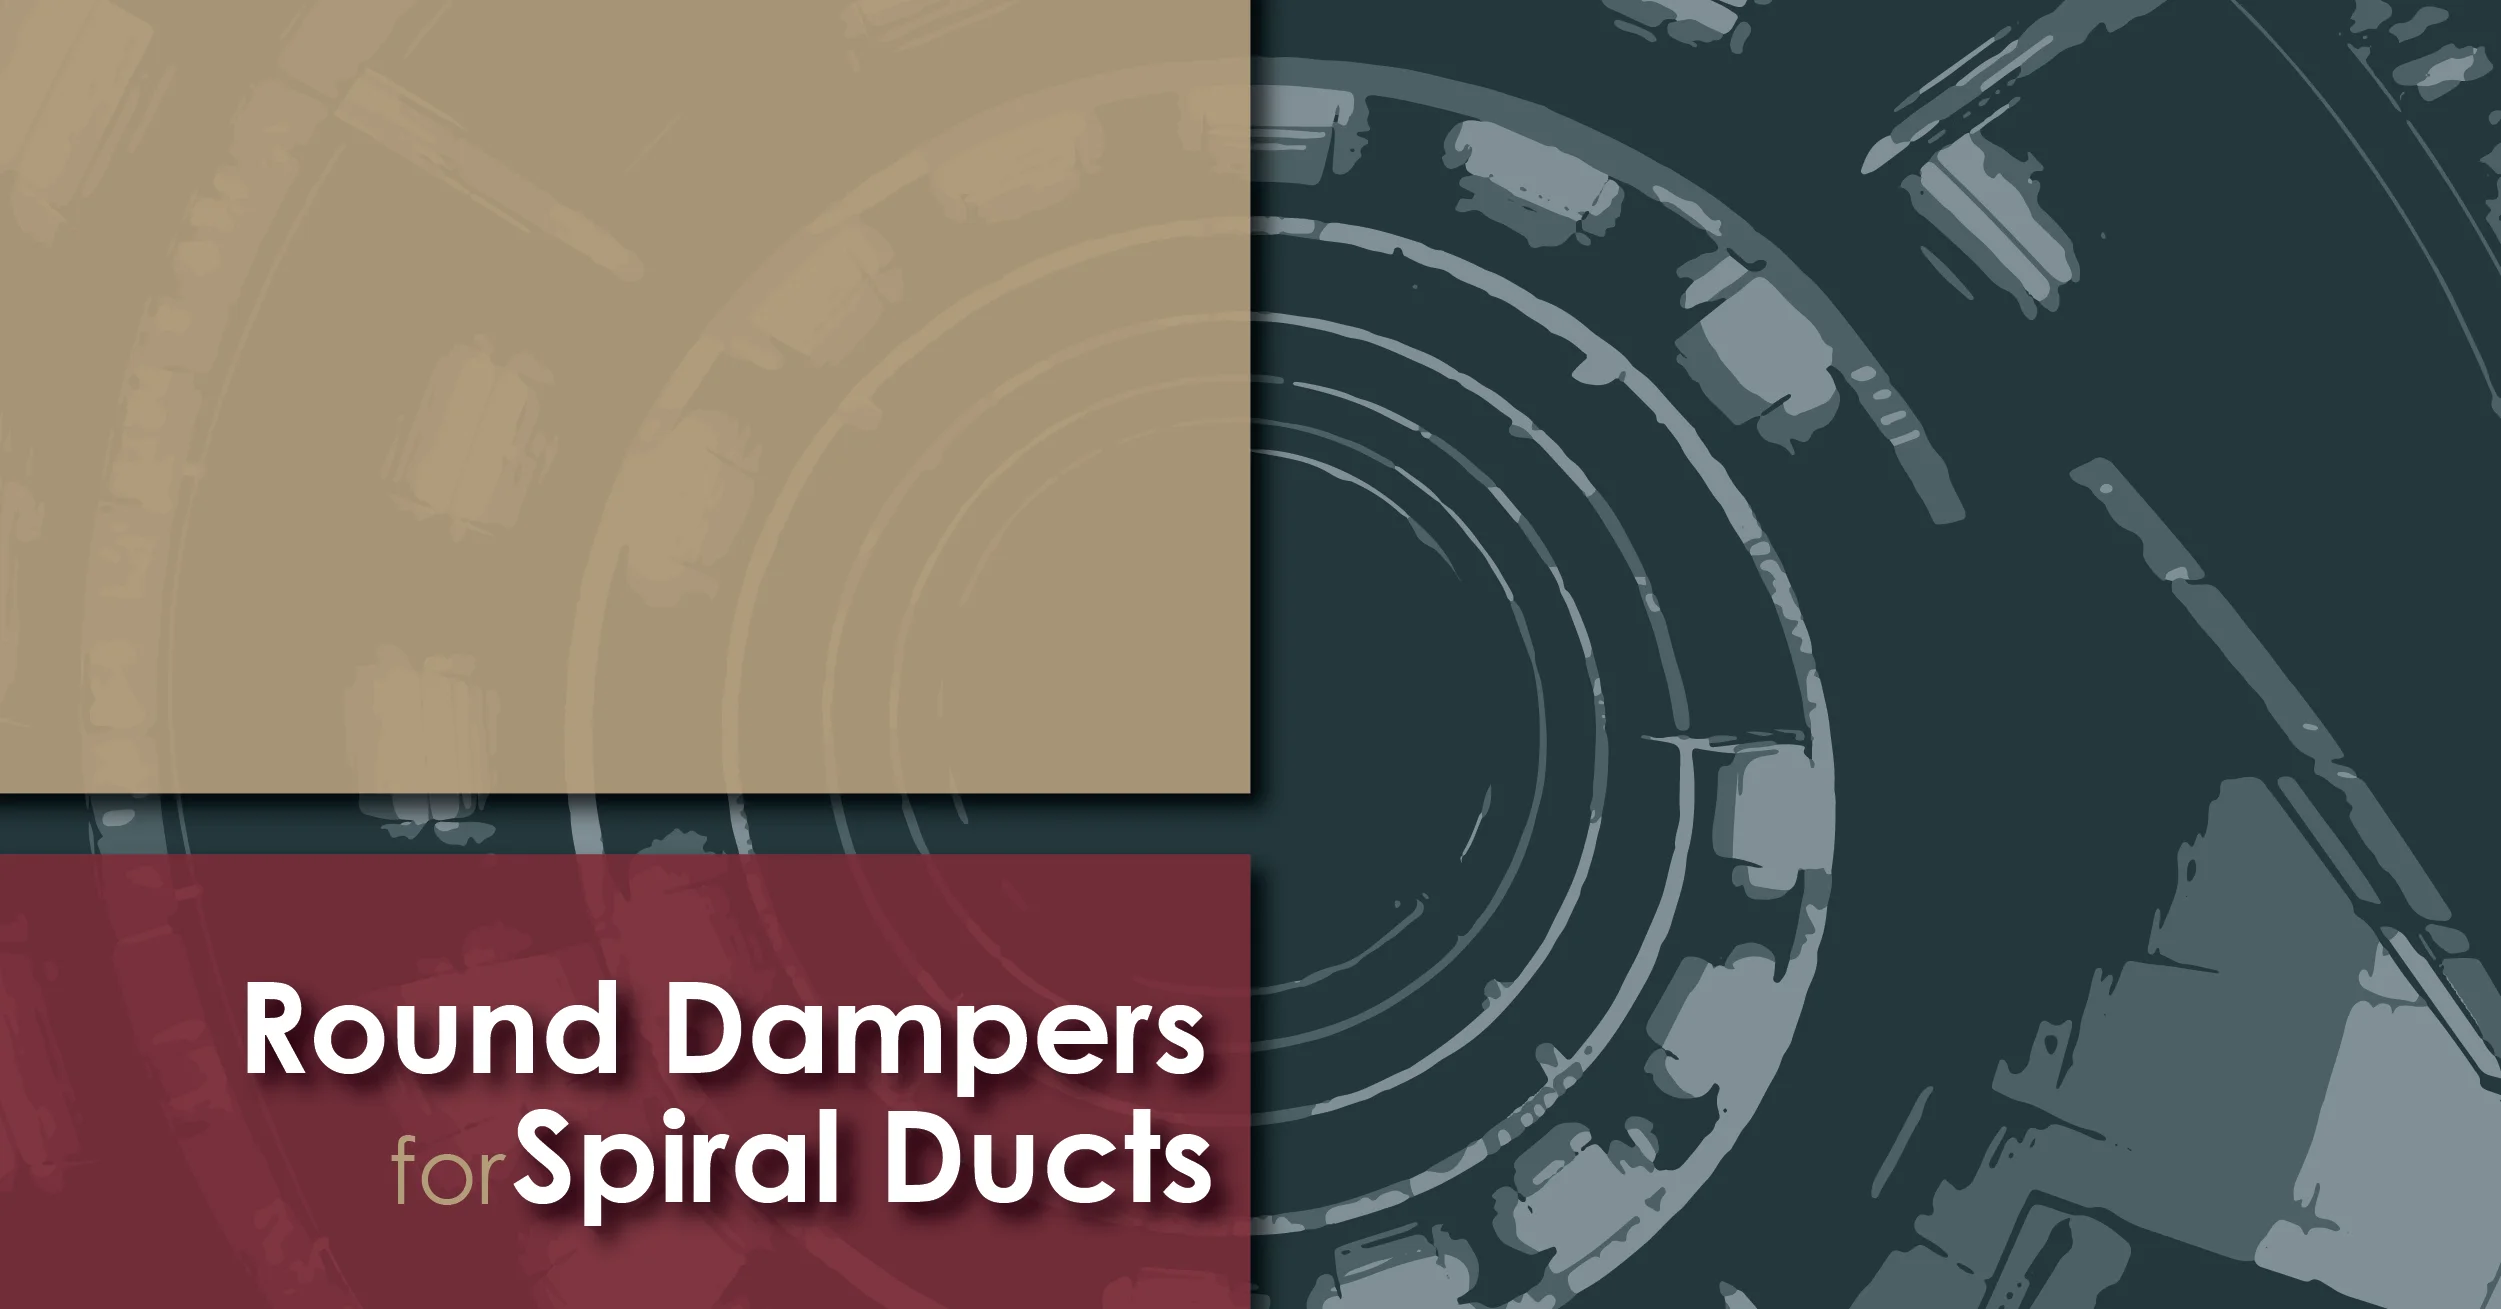 Round Dampers for Spiral Ducts